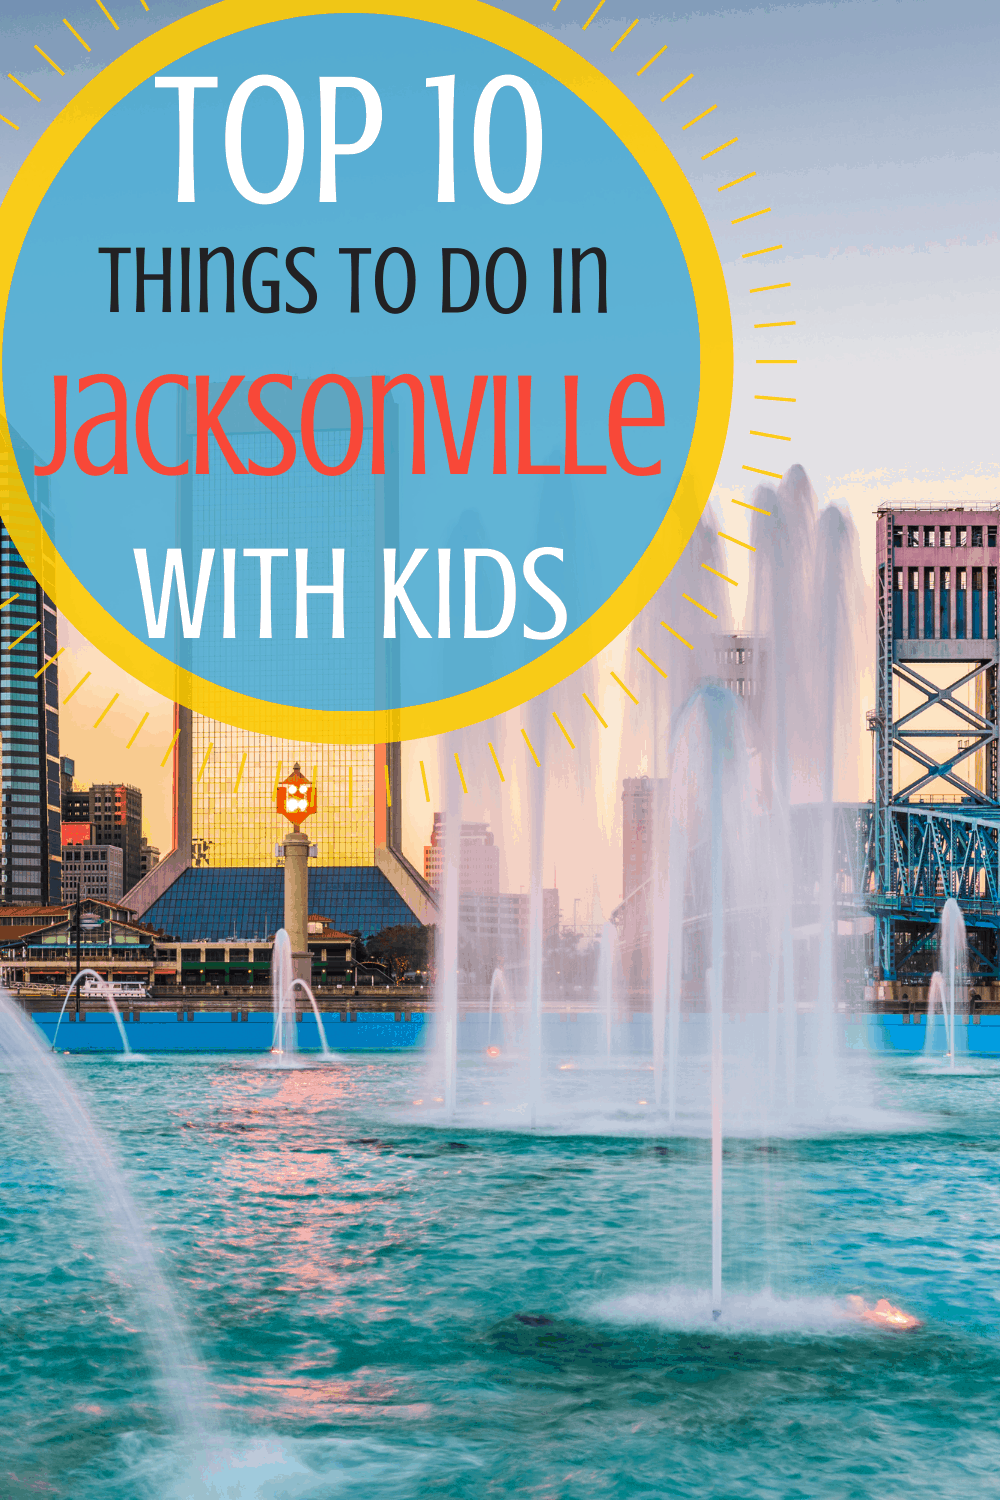 10 Fun Things To Do in Jacksonville with Kids Trekaroo Family Travel Blog